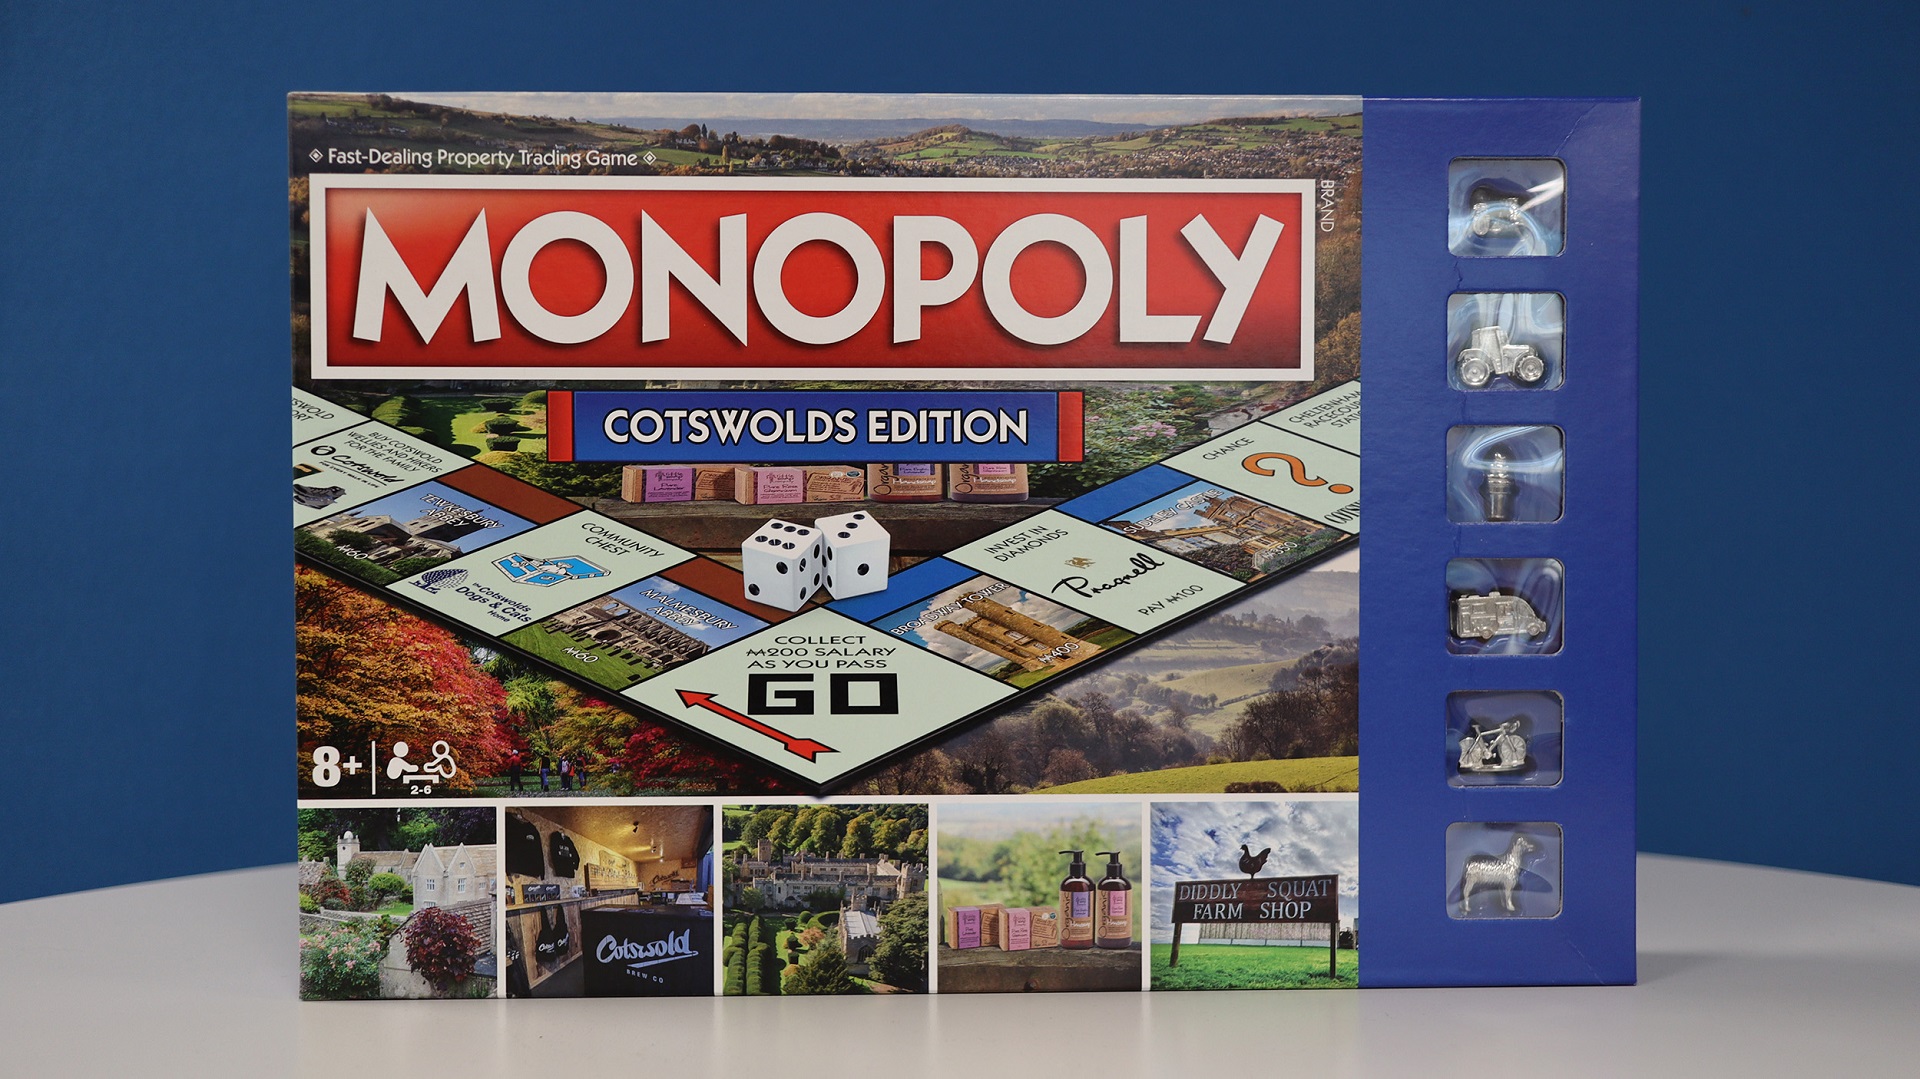 Monopoly Cotswolds Edition